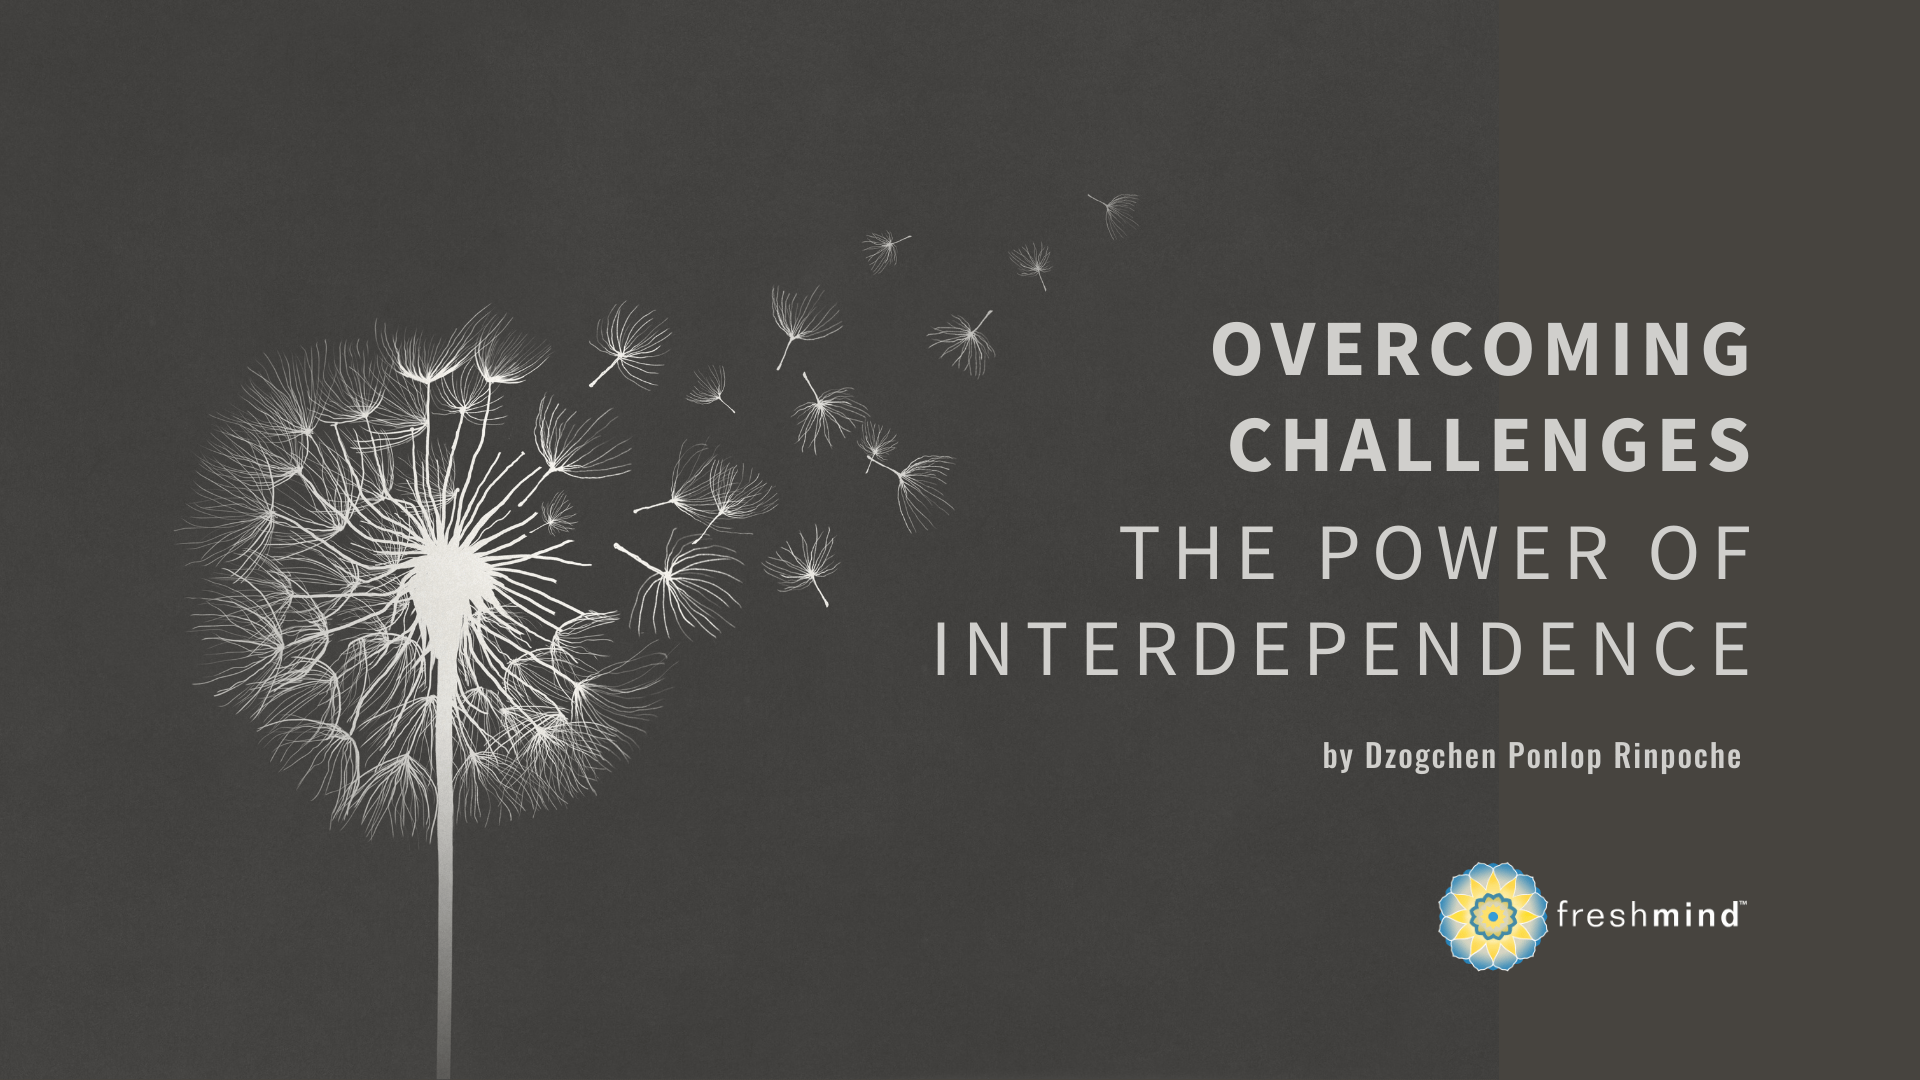 OVERCOMING CHALLENGES, THE POWER OF INTERDEPENDENCE